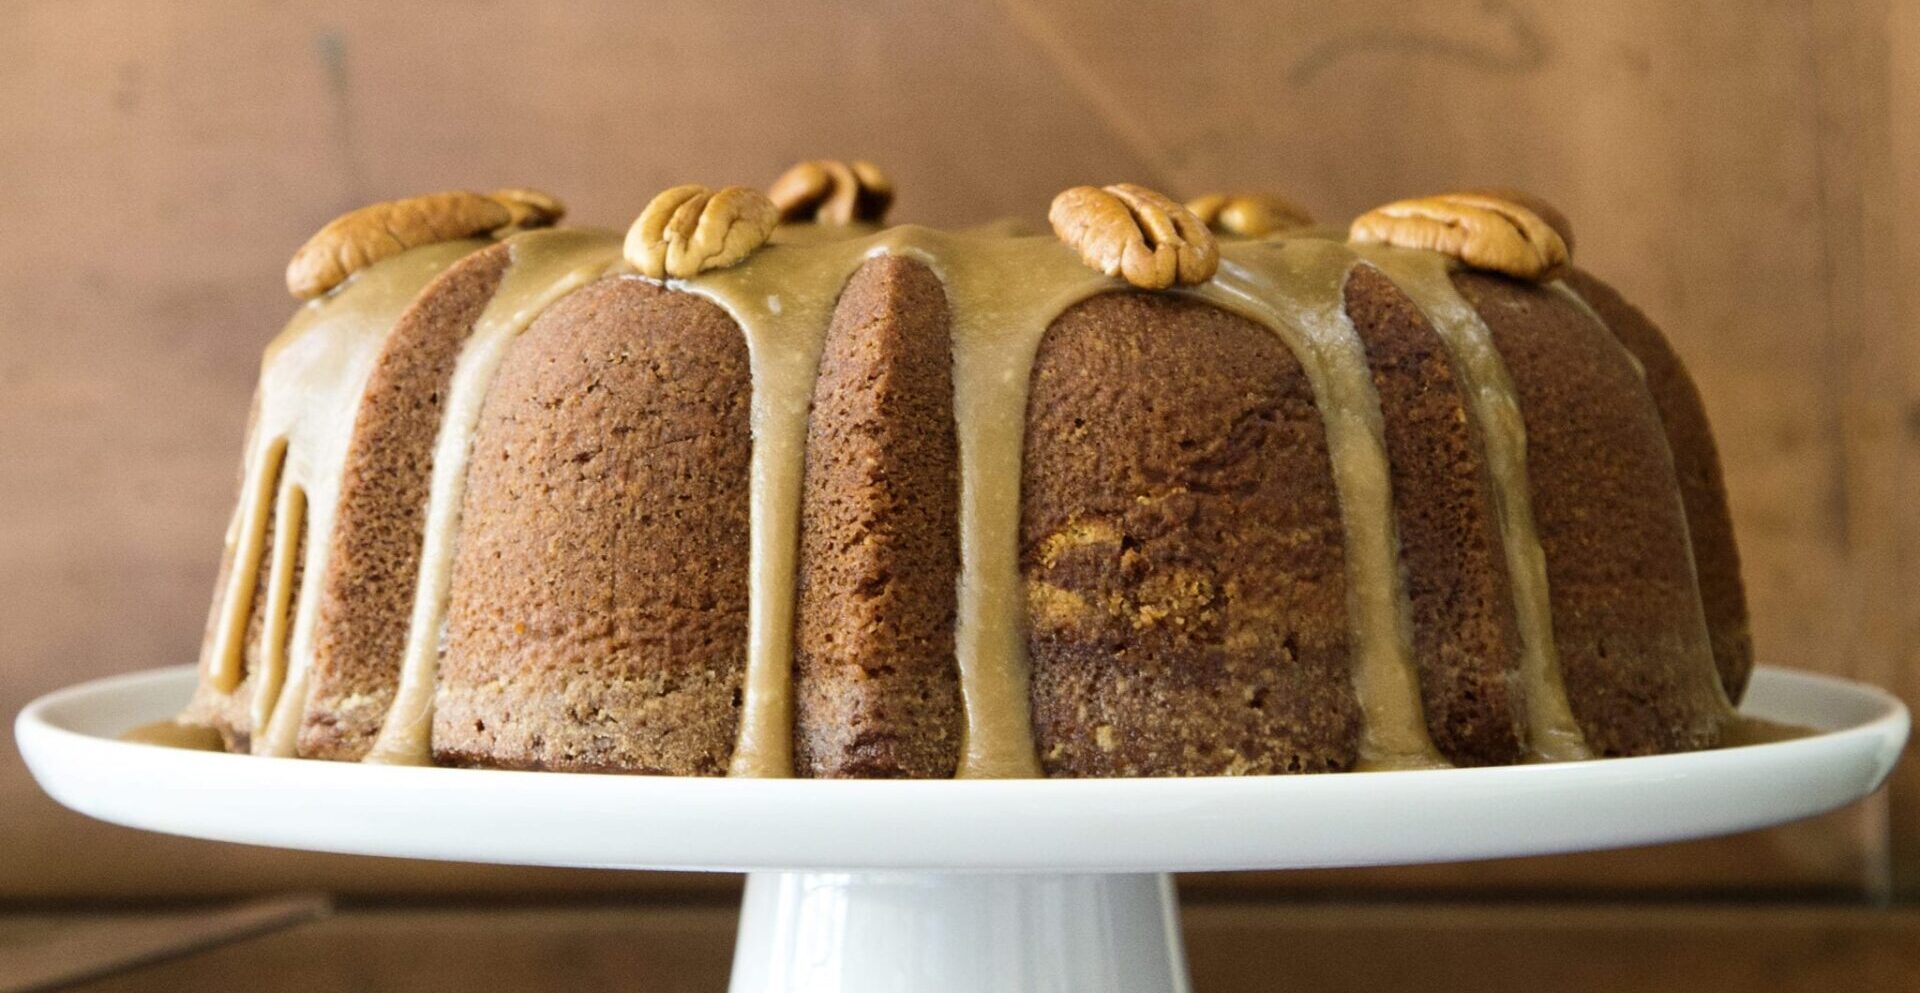 Apple Cider Pound Cake is a show-stopping apple recipe